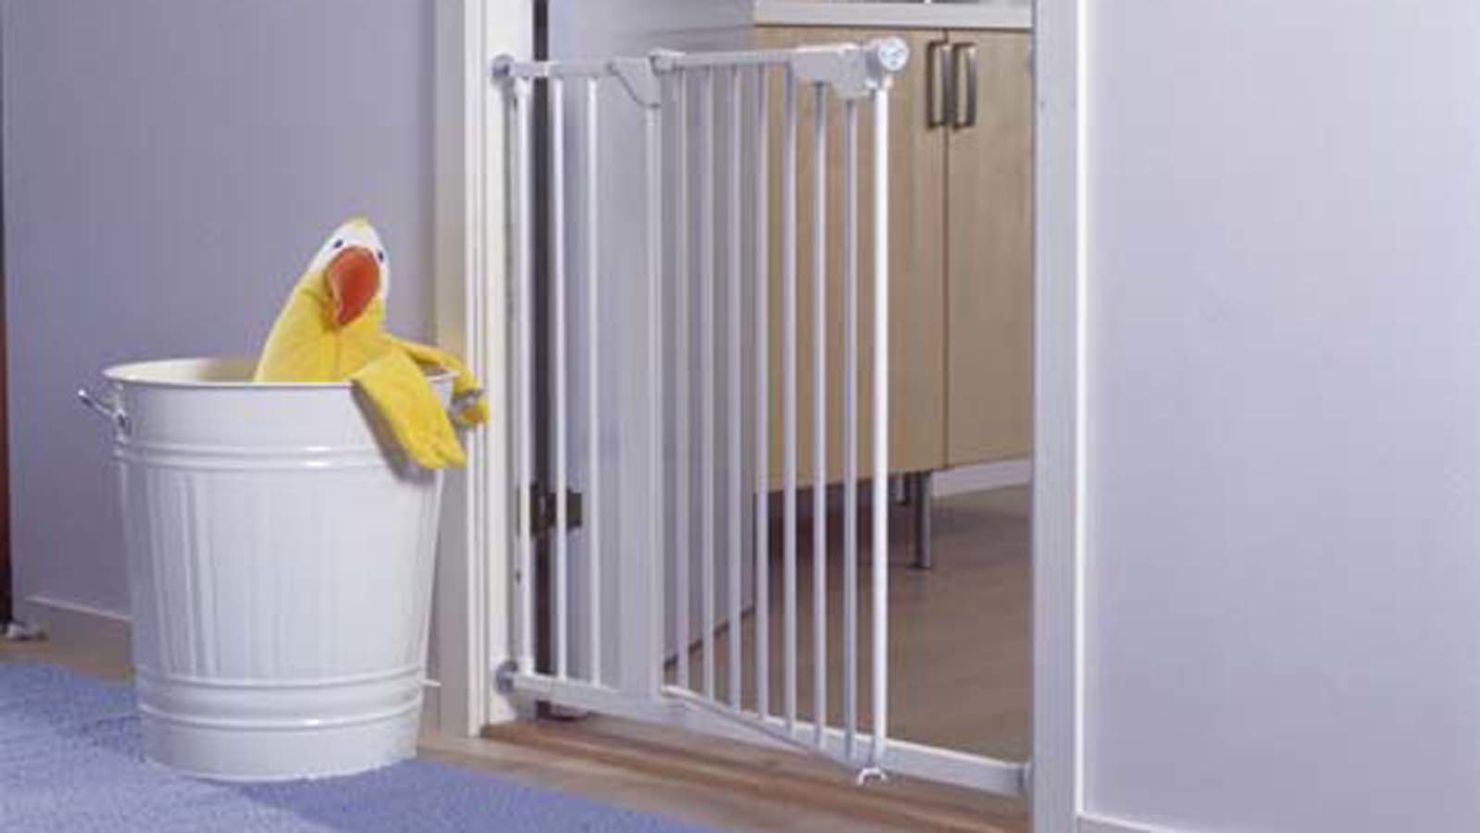 IKEA's PATRULL KLAMMA safety gate + extension was recalled because it can become unlocked and open unexpectedly. It was first recalled in May after reports of the gate coming unmounted from the wall and not staying in place. There were at least three reports of children falling down stairs as a result. 